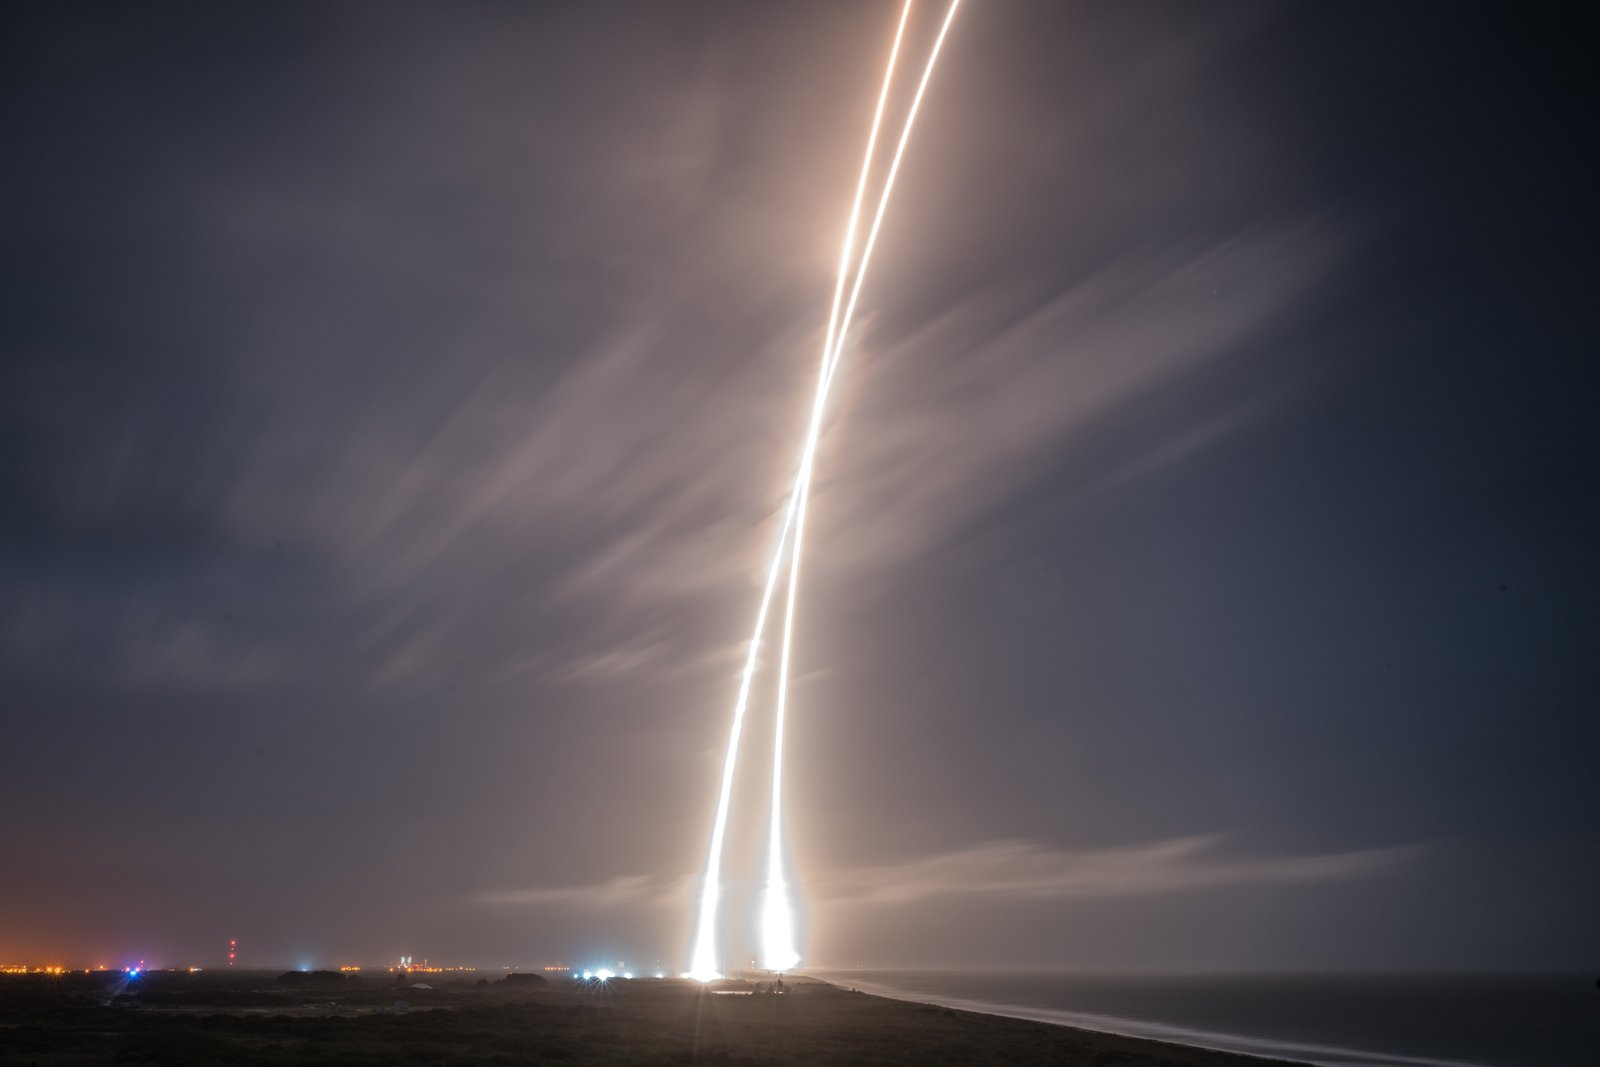 Nine-minute exposure picture of the launch, re-entry and landing burns of SpaceX's Falcon 9 rocket at Cape Canaveral Air Force Station.